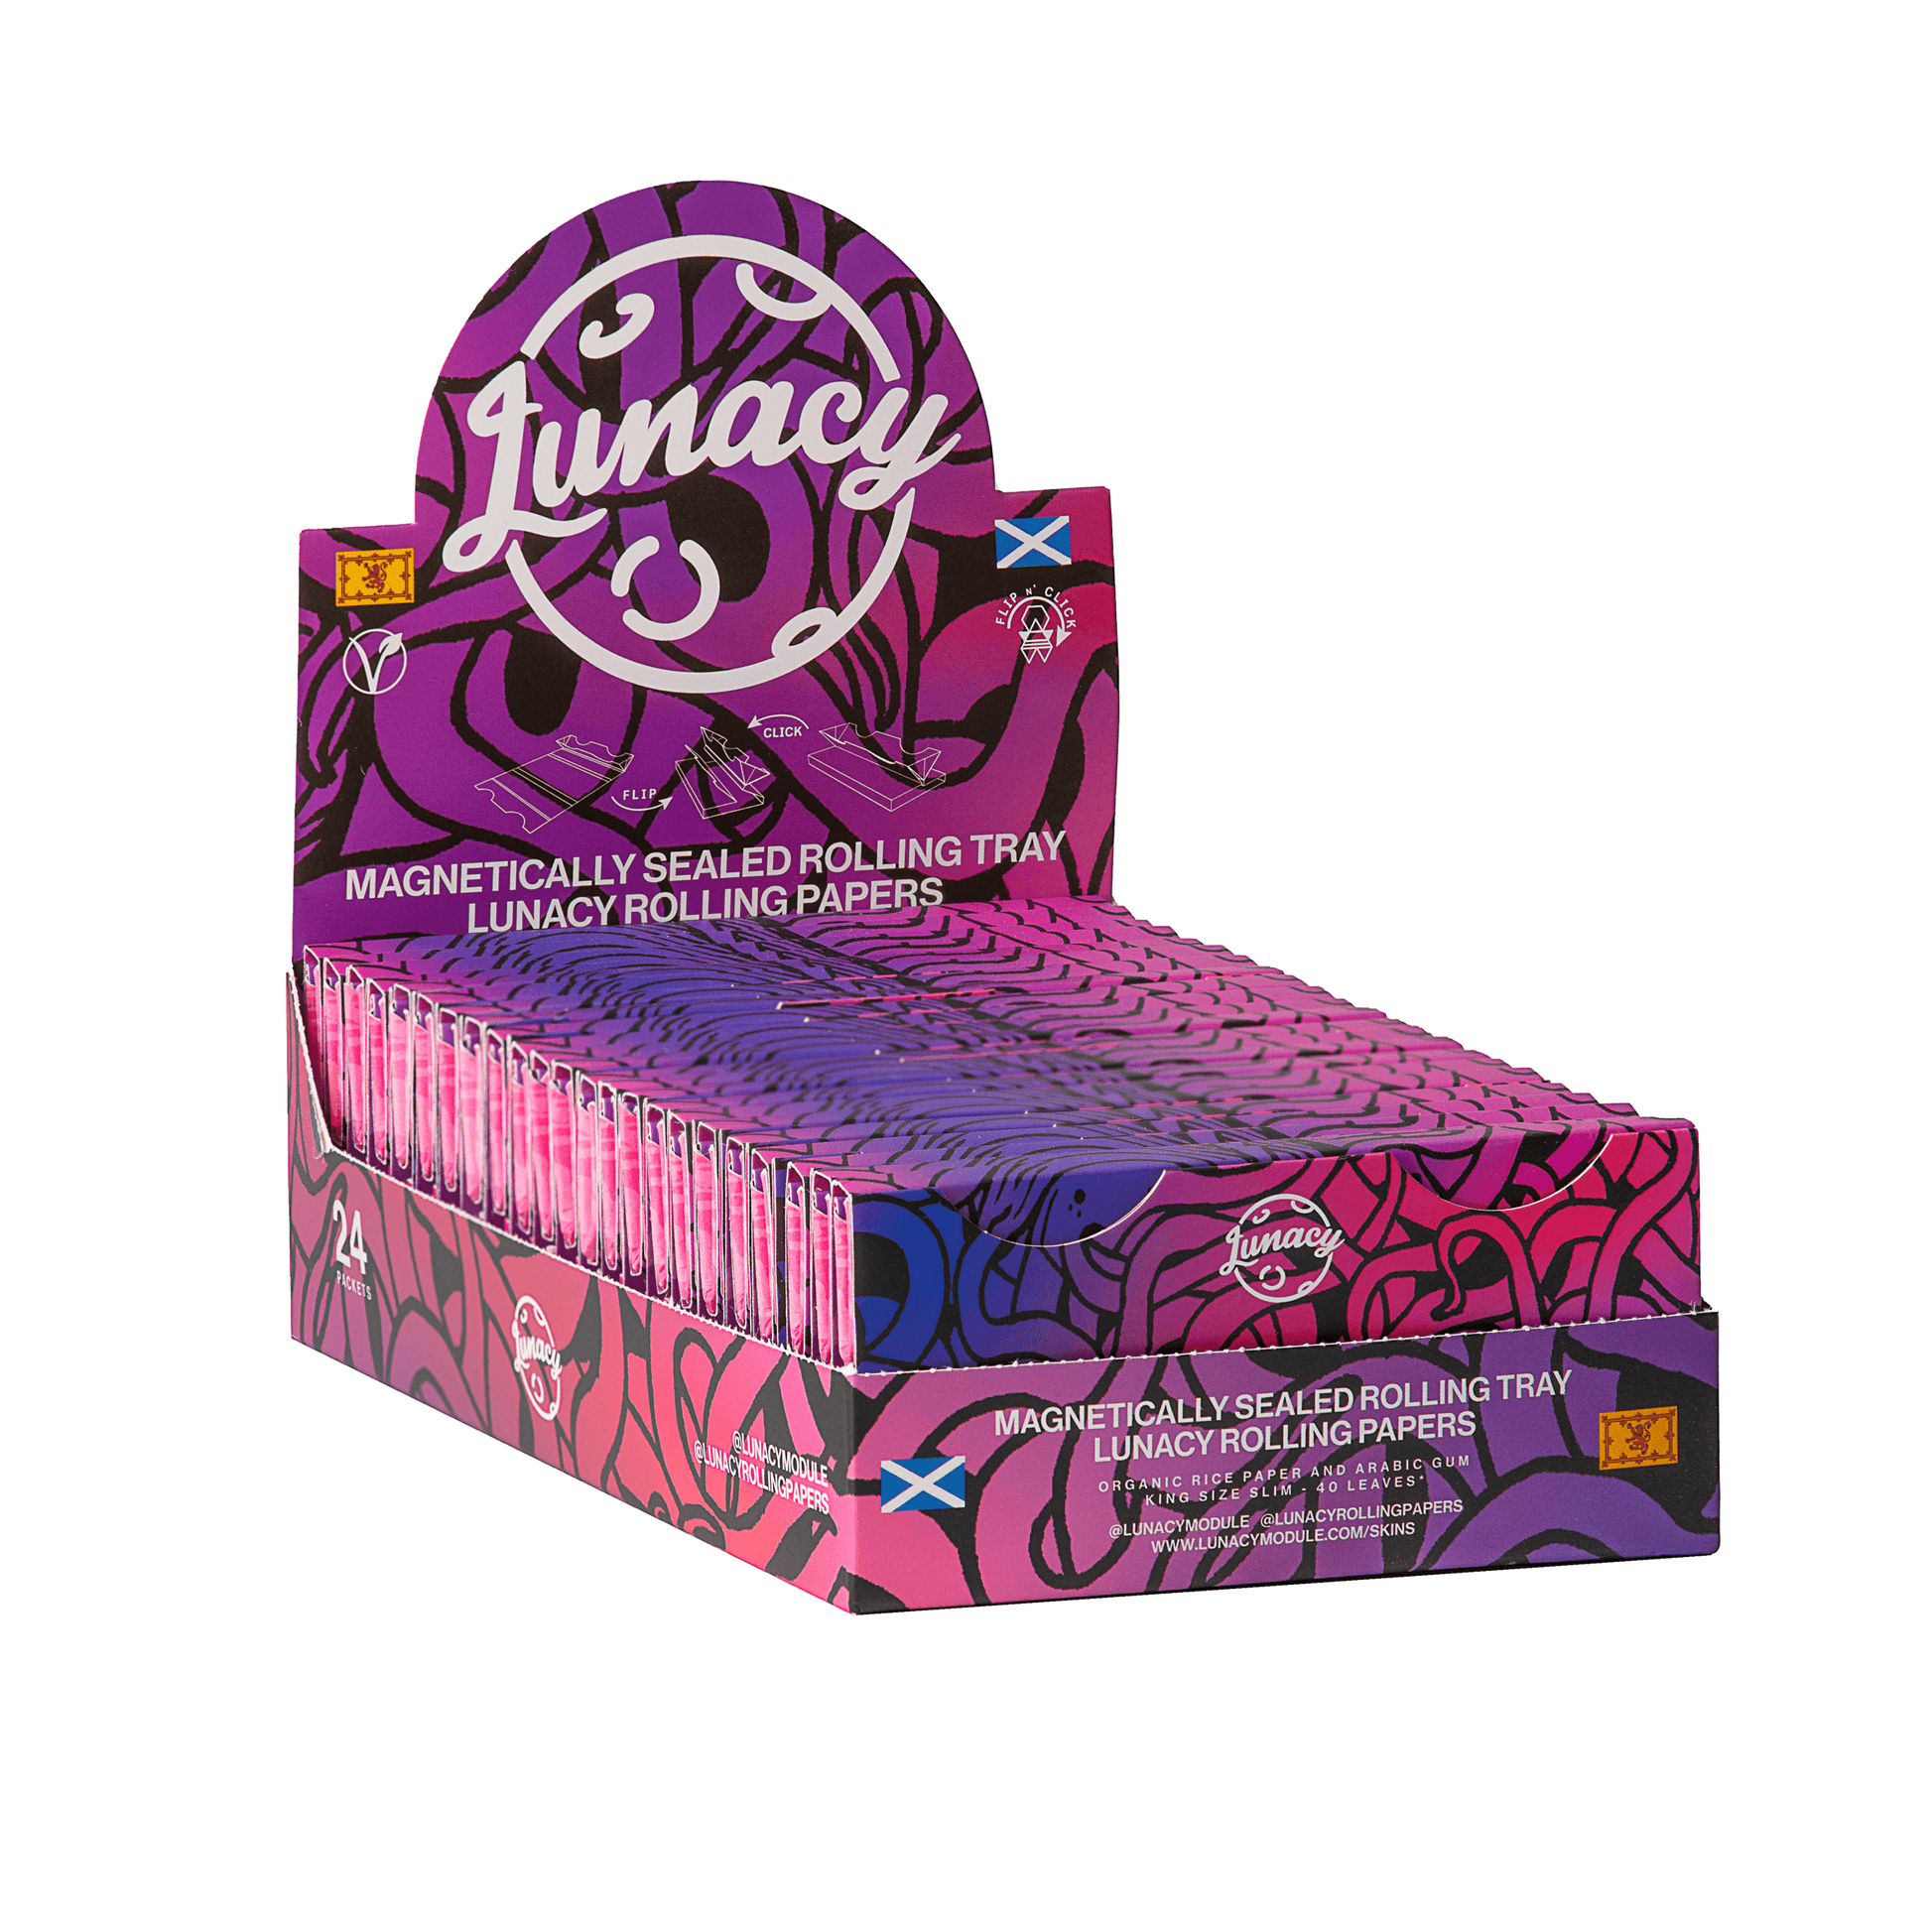 LUNACY ROLLING PAPERS ORGANIC KINGSIZE SLIM MAGNETICALLY SEALED ROLLING TRAY - munchterm